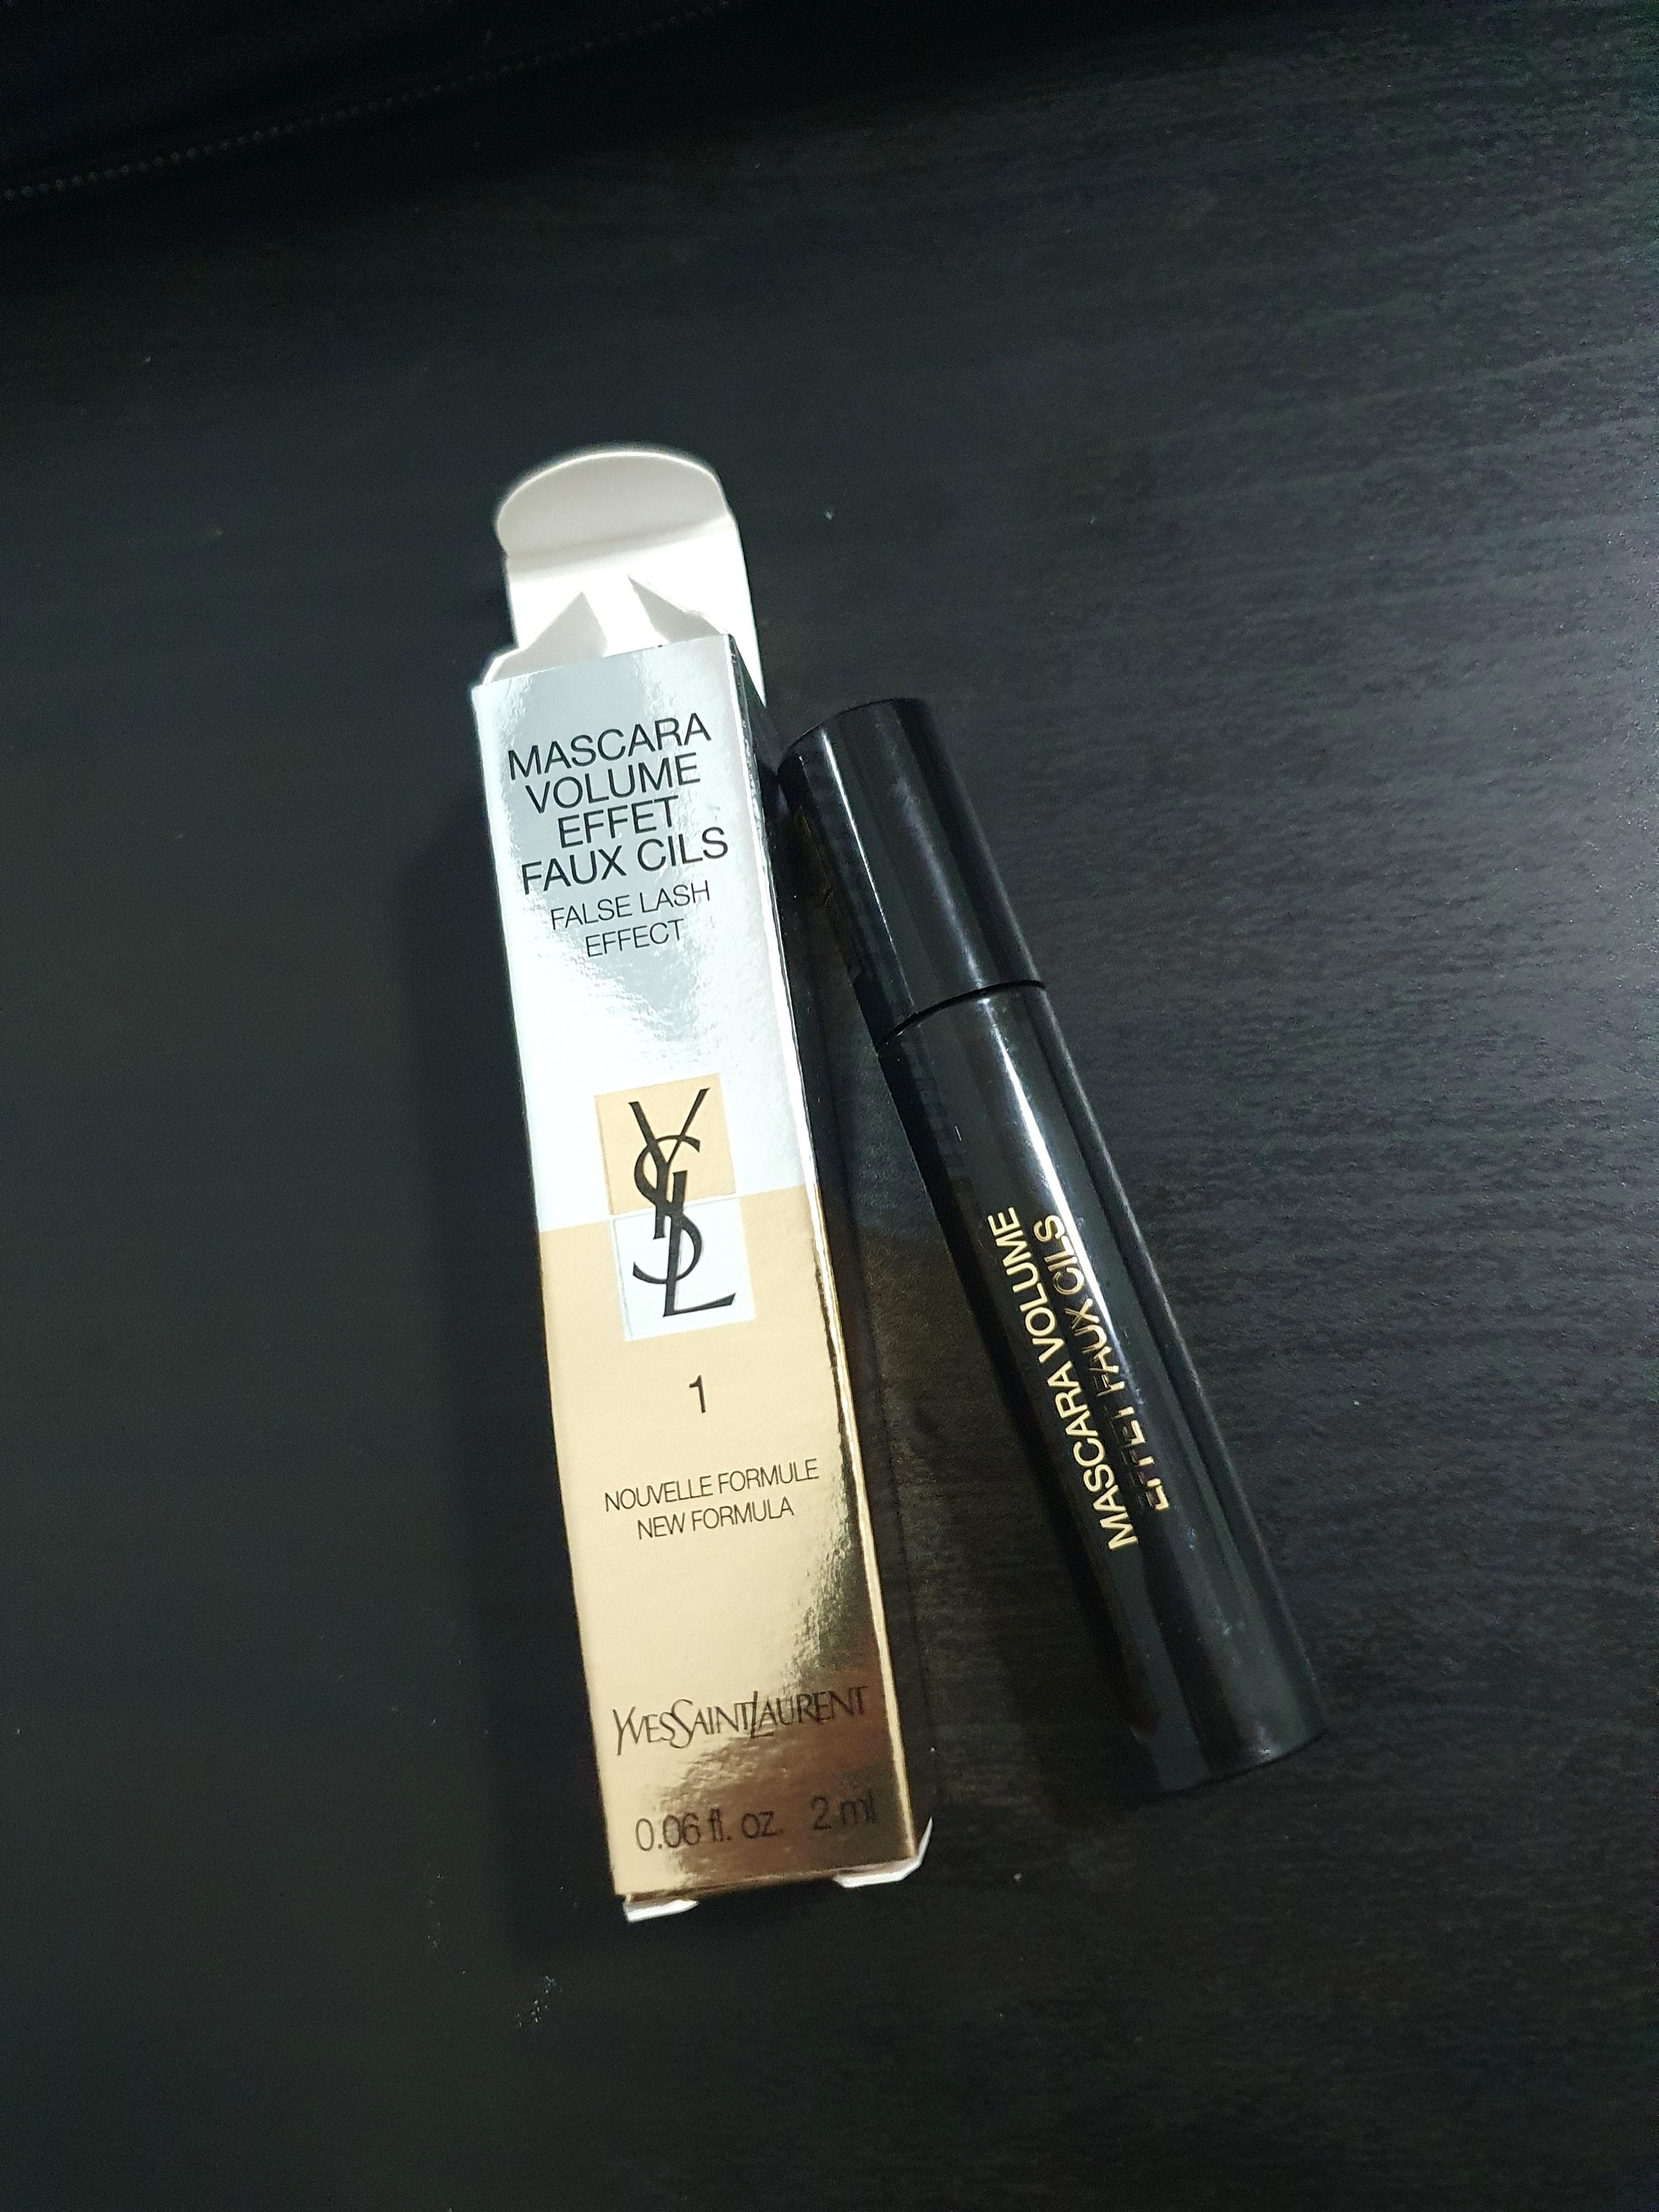 YSL Mascara Volume Effet Faux Cils - The Curler Review & Demo 